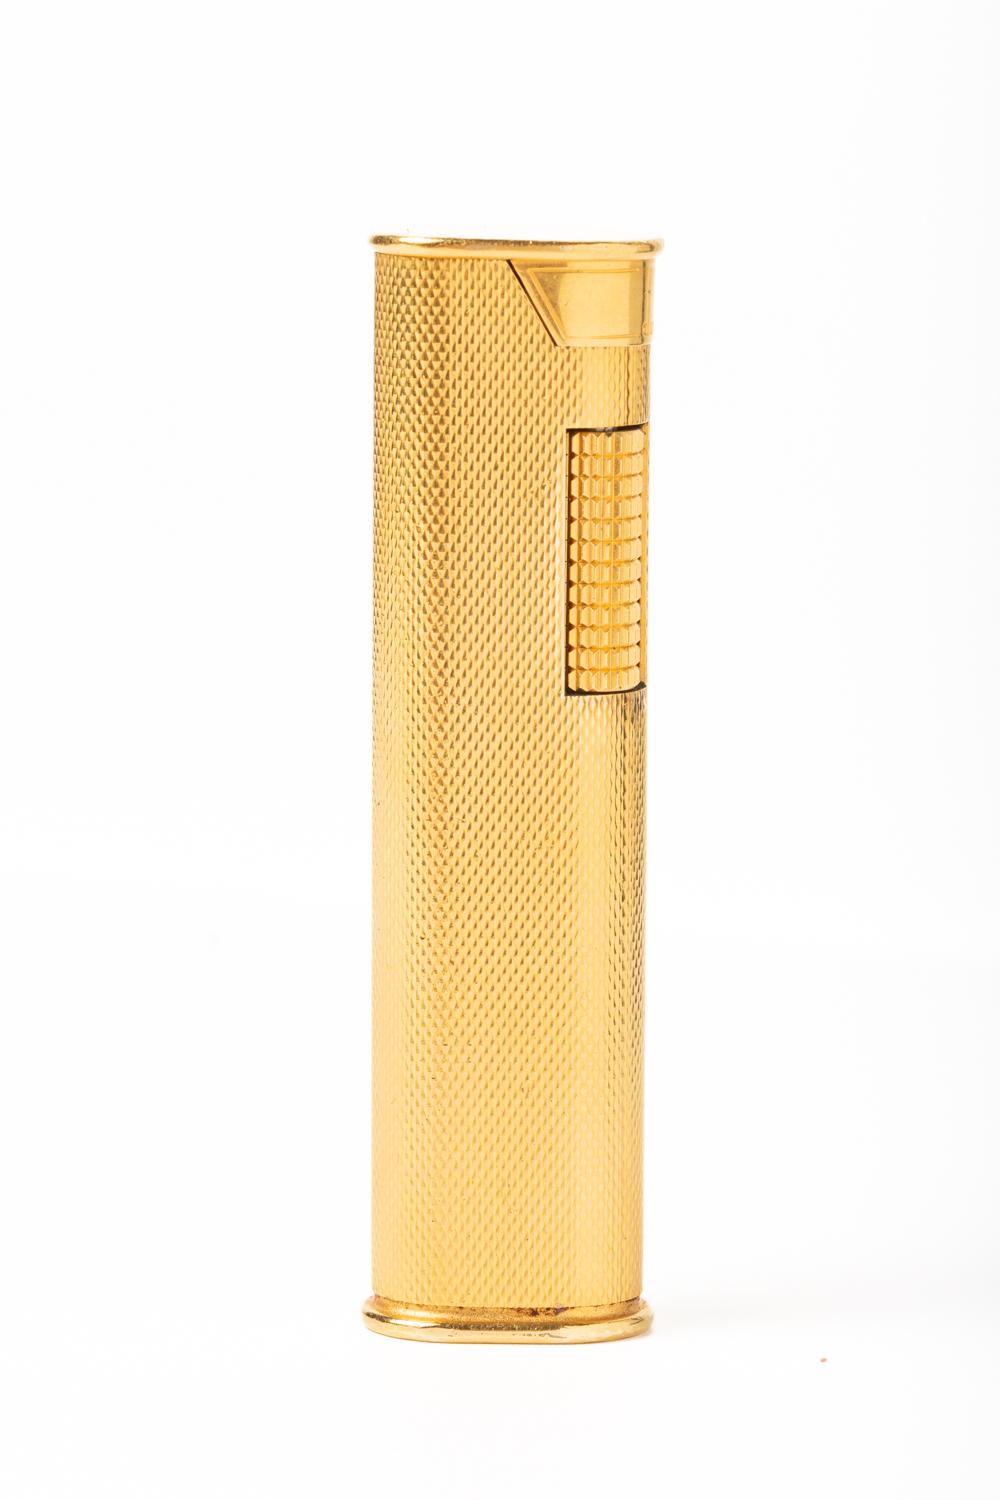 Very rare and elegant vintage Dunhill gold plated 'Slim' lighter This lighter was made in 1960's to 1970's as an evening lighter. Fit perfectly inside your jacket and it's great to handle. Comes with an original box and the documents. Stamped on the